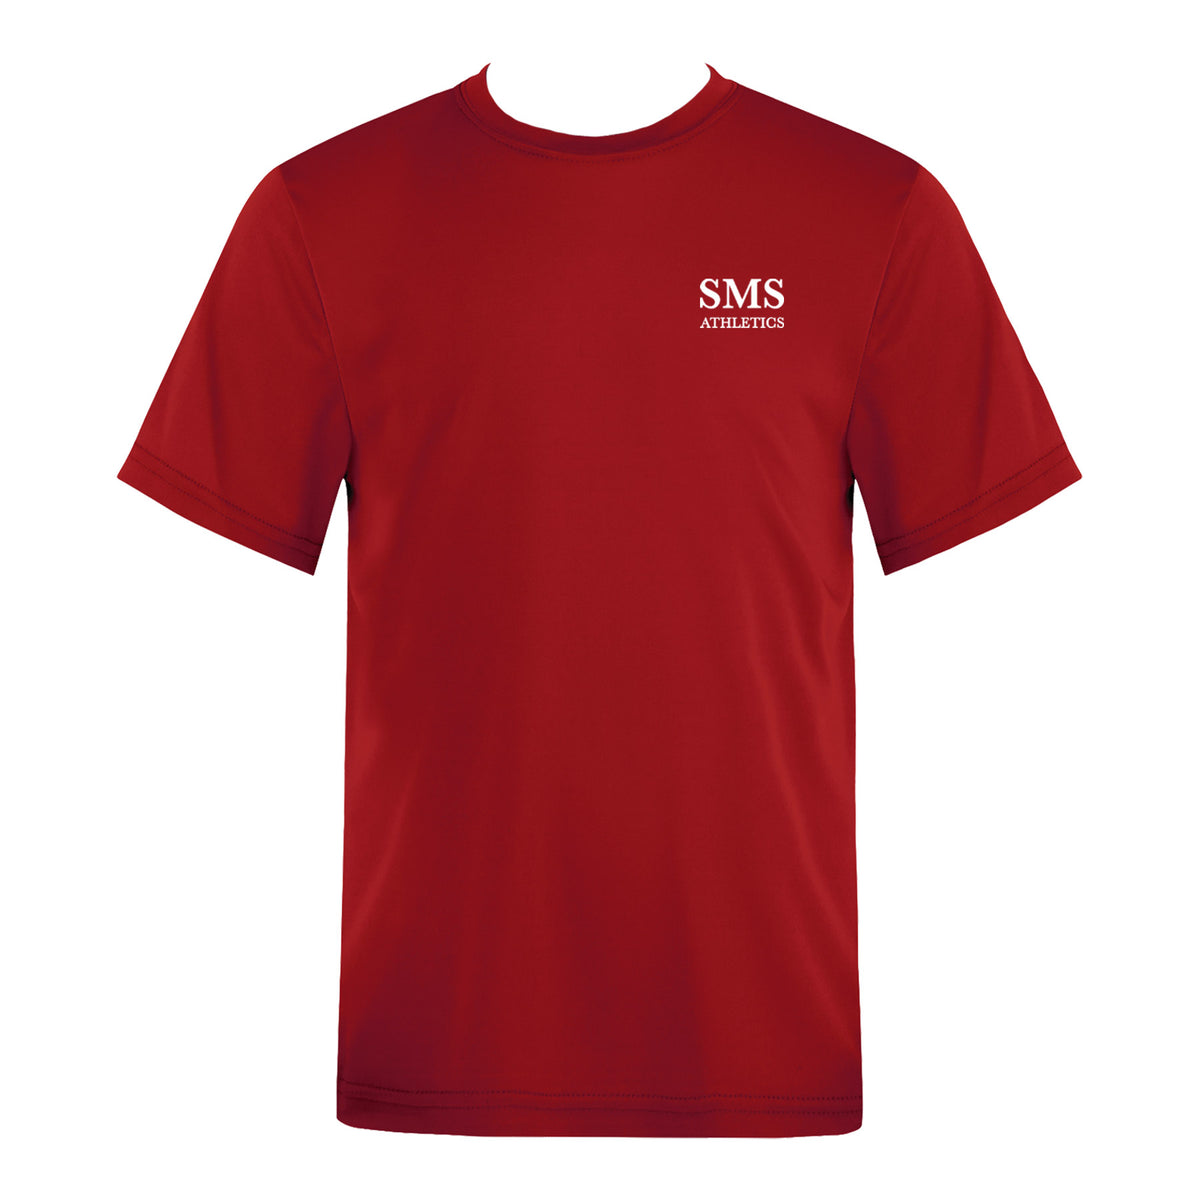 SMS GYM T-SHIRT, WICKING, YOUTH